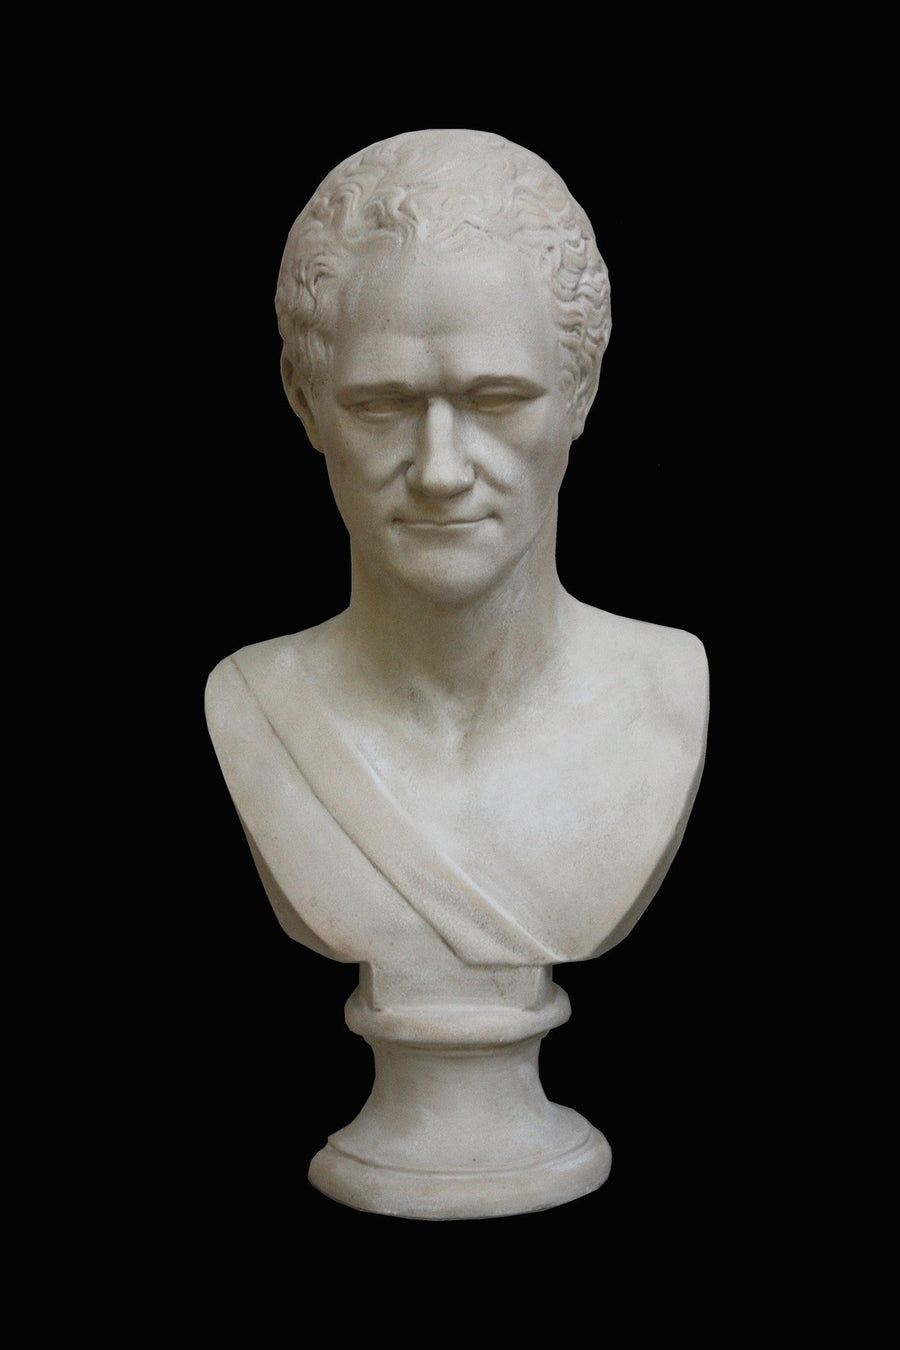 photo with black background of plaster cast bust of Alexander Hamilton